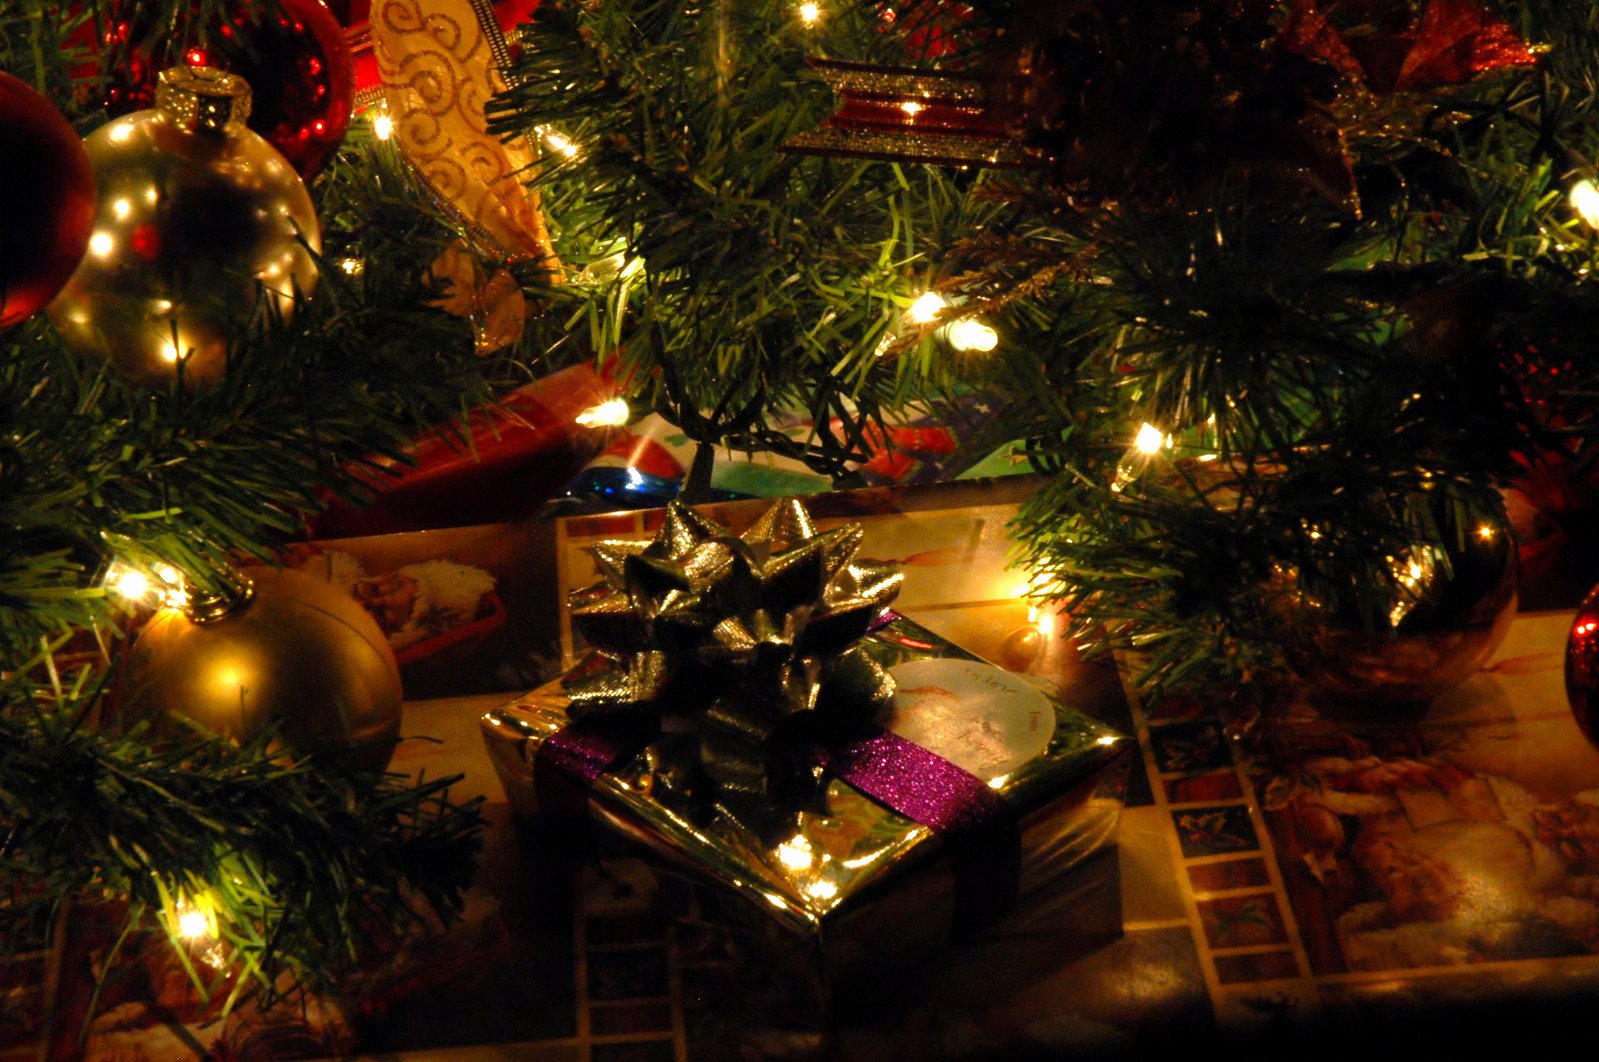 many presents are wrapped in christmas paper and placed under christmas trees